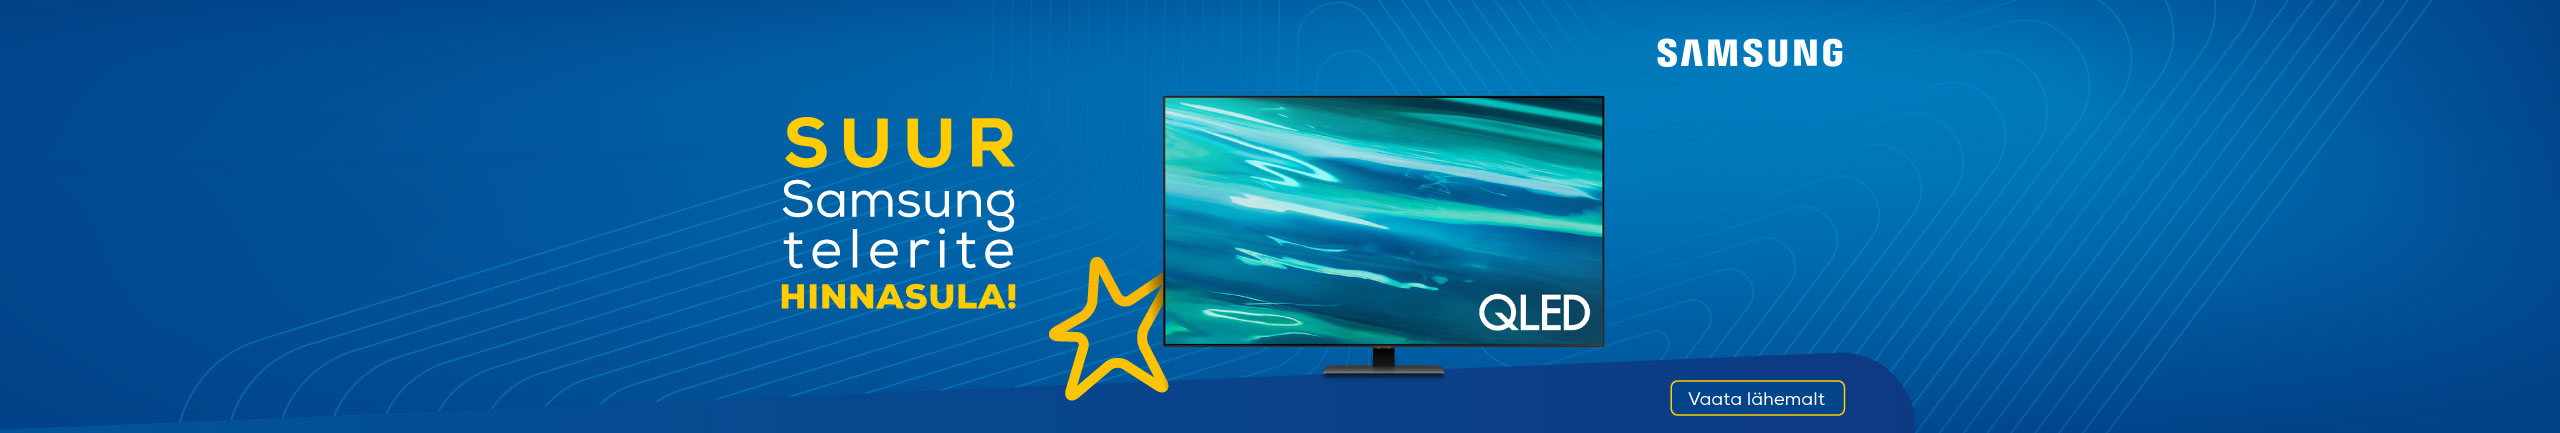 Sale for Samsung TV-s!